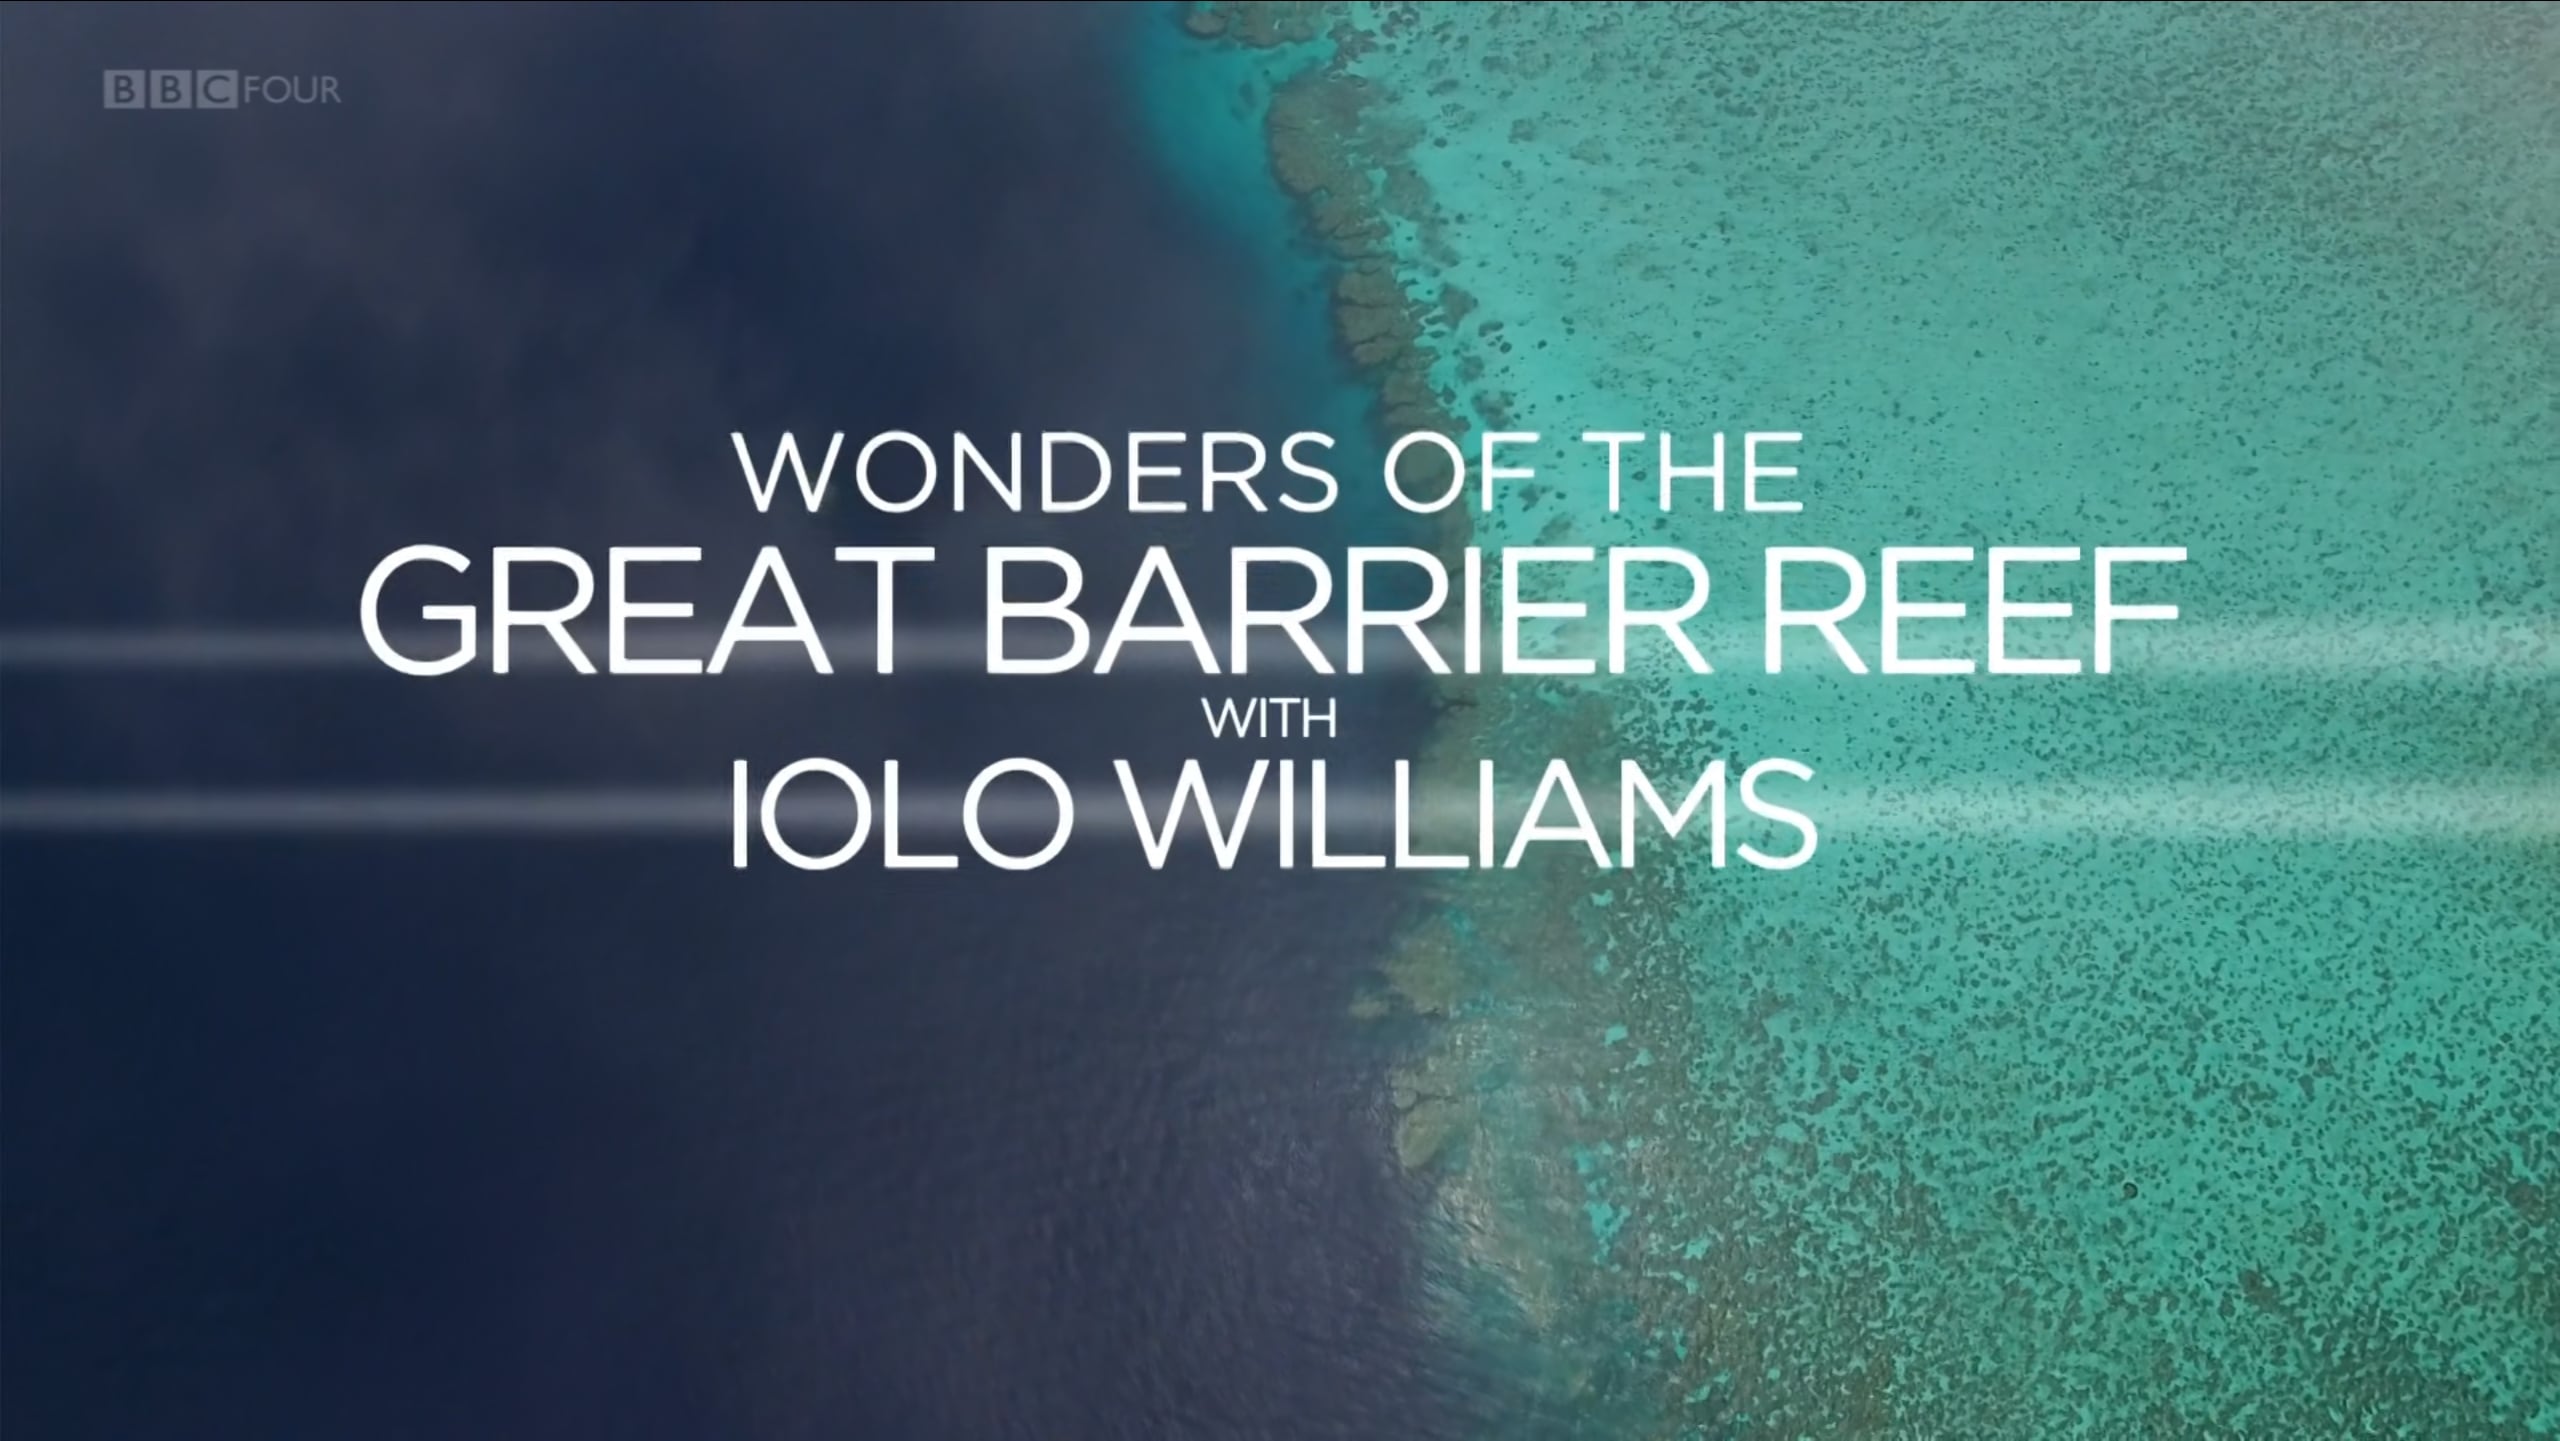 Wonders of the Great Barrier Reef with Iolo Williams (2018)